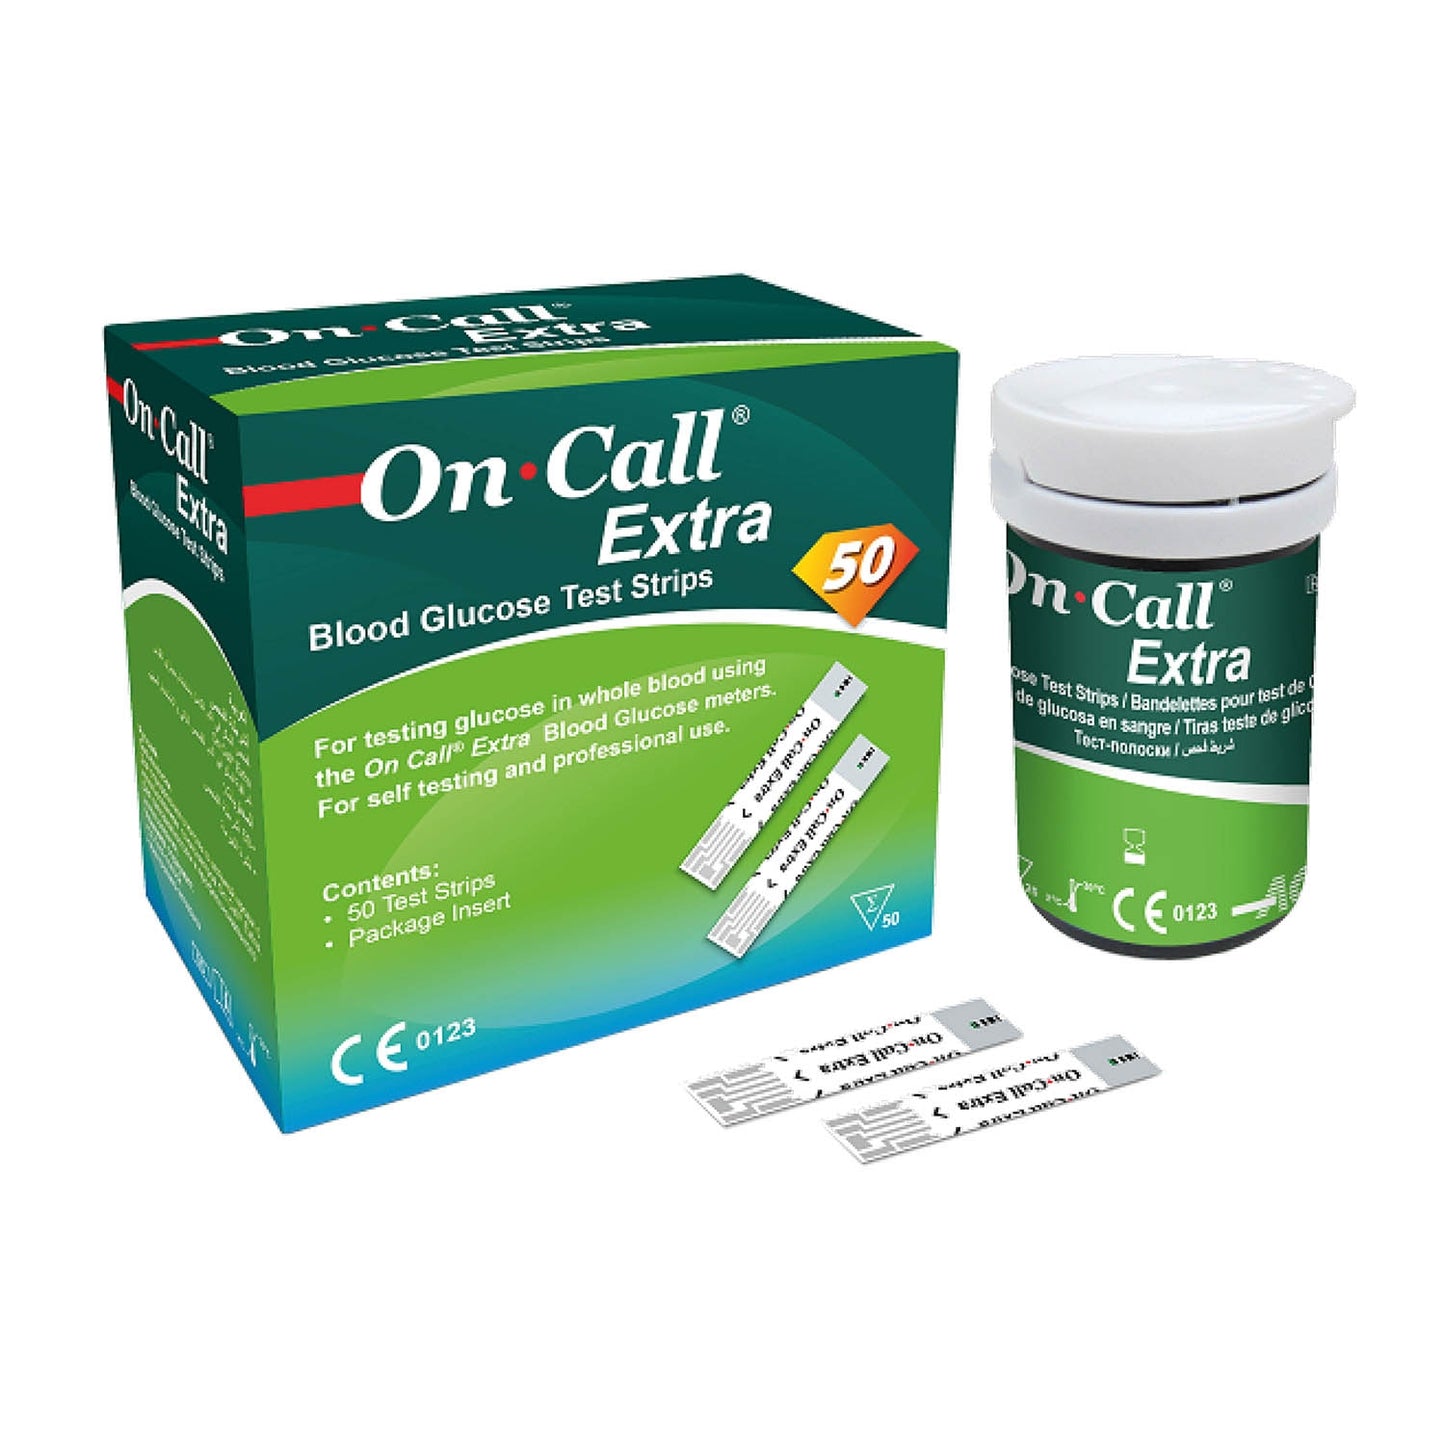 On Call Extra Blood Glucose Test Strips - Qty50